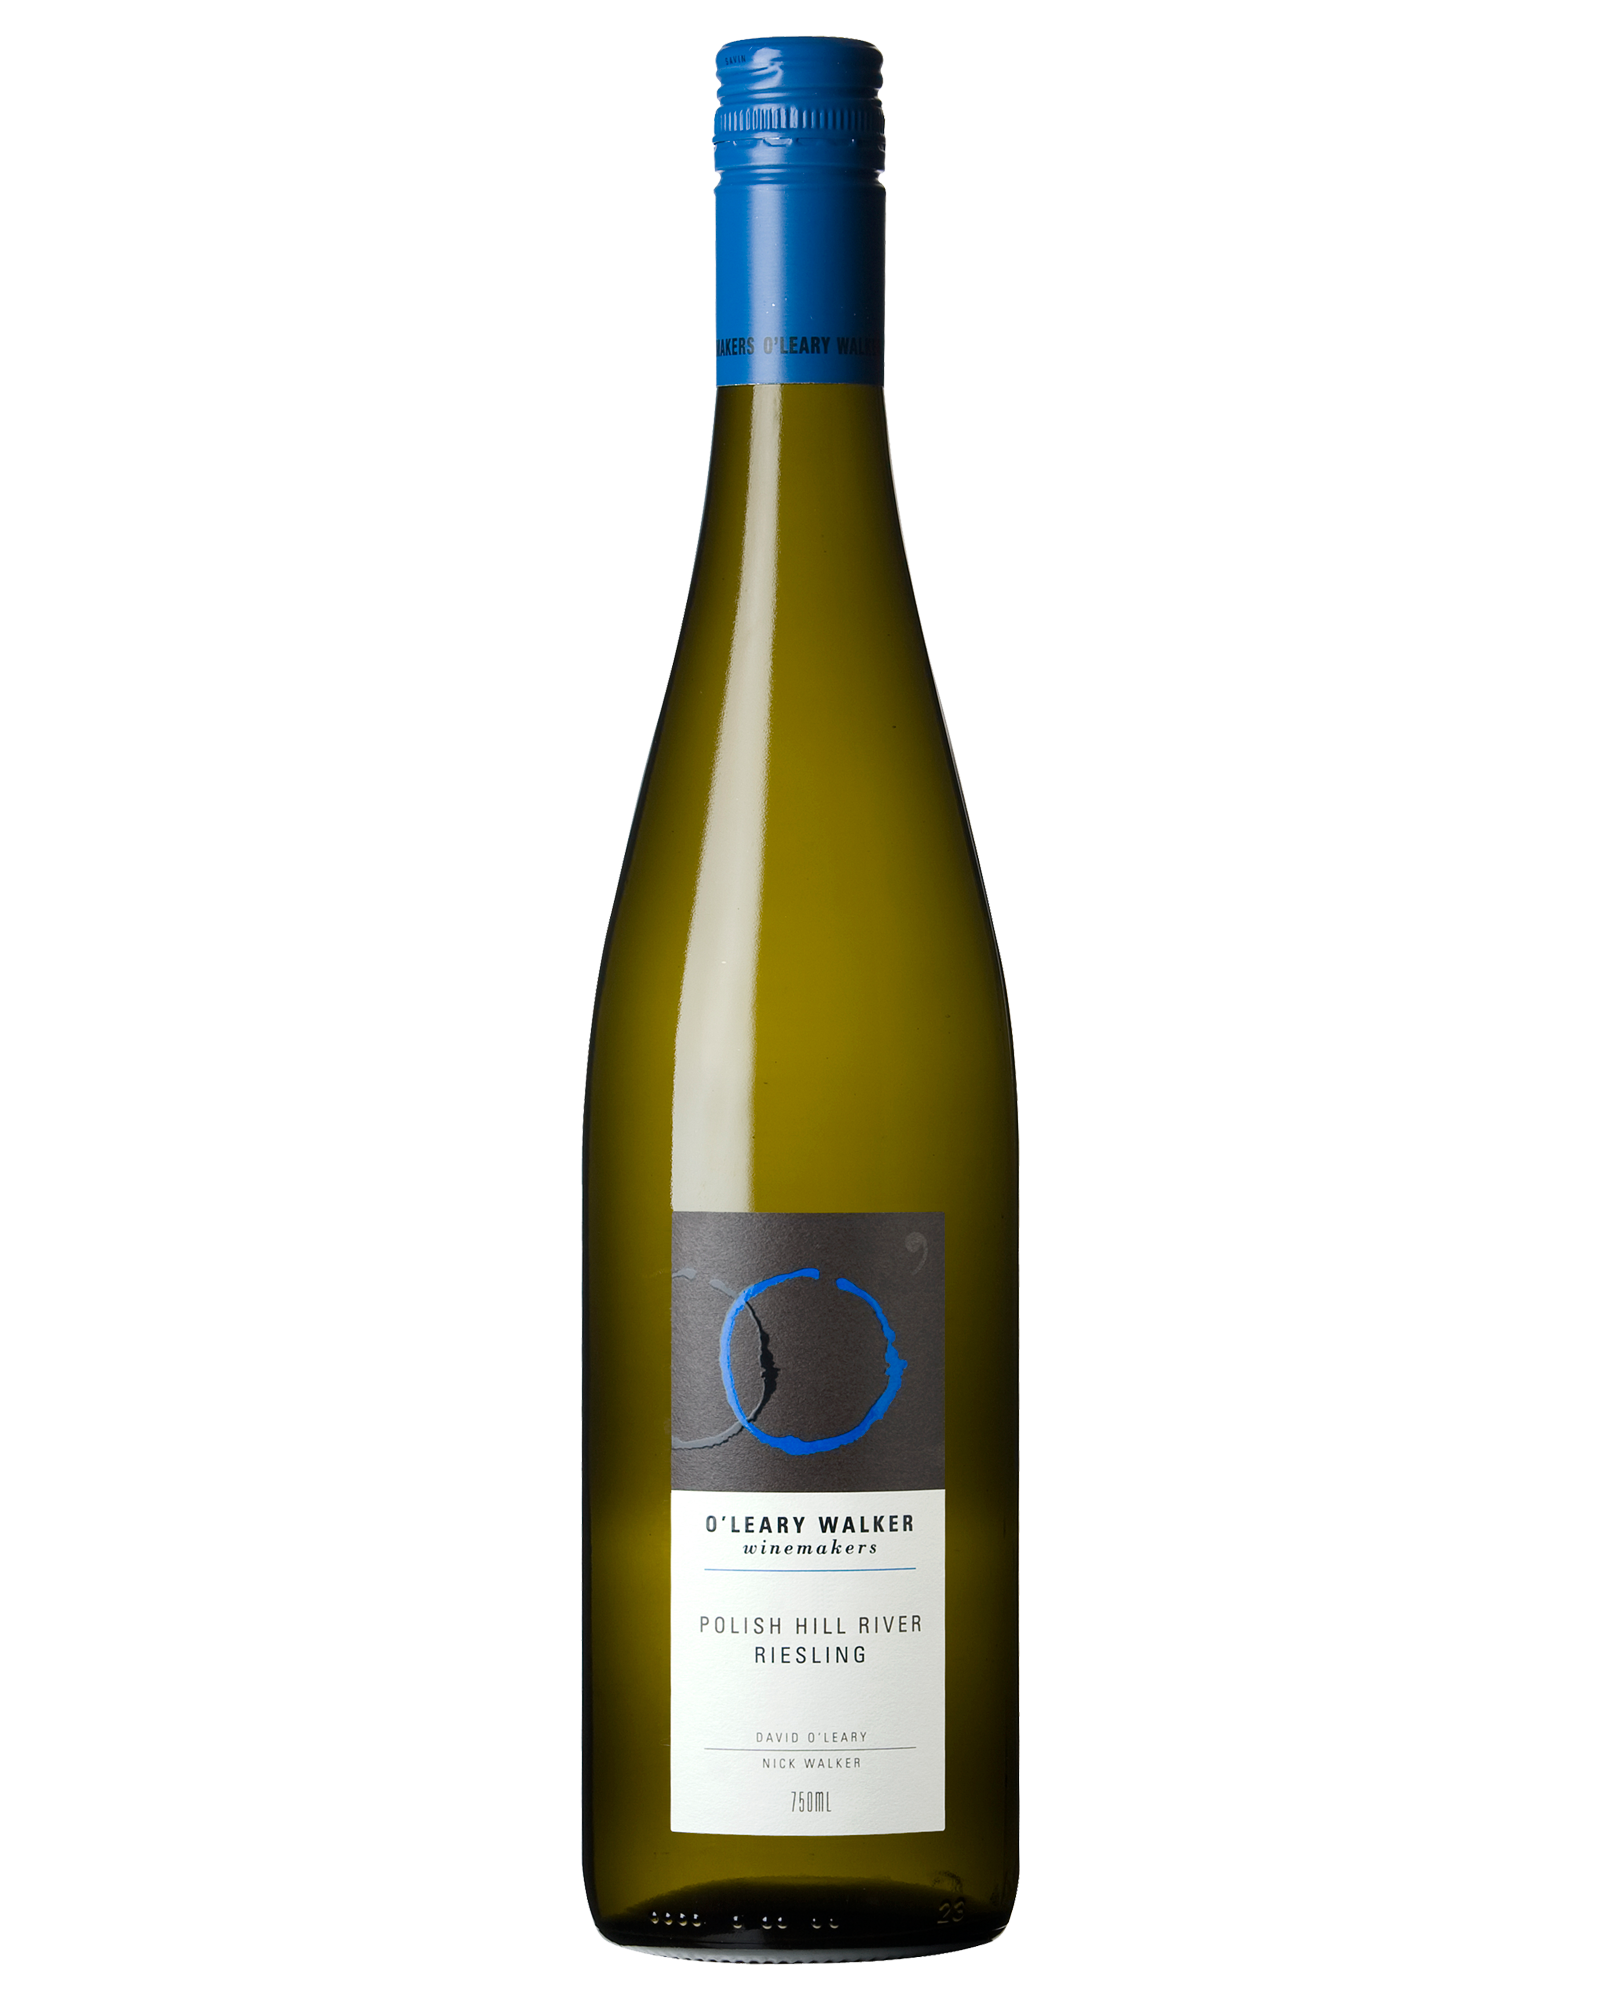 O’Leary Walker Polish Hill River Riesling 2008